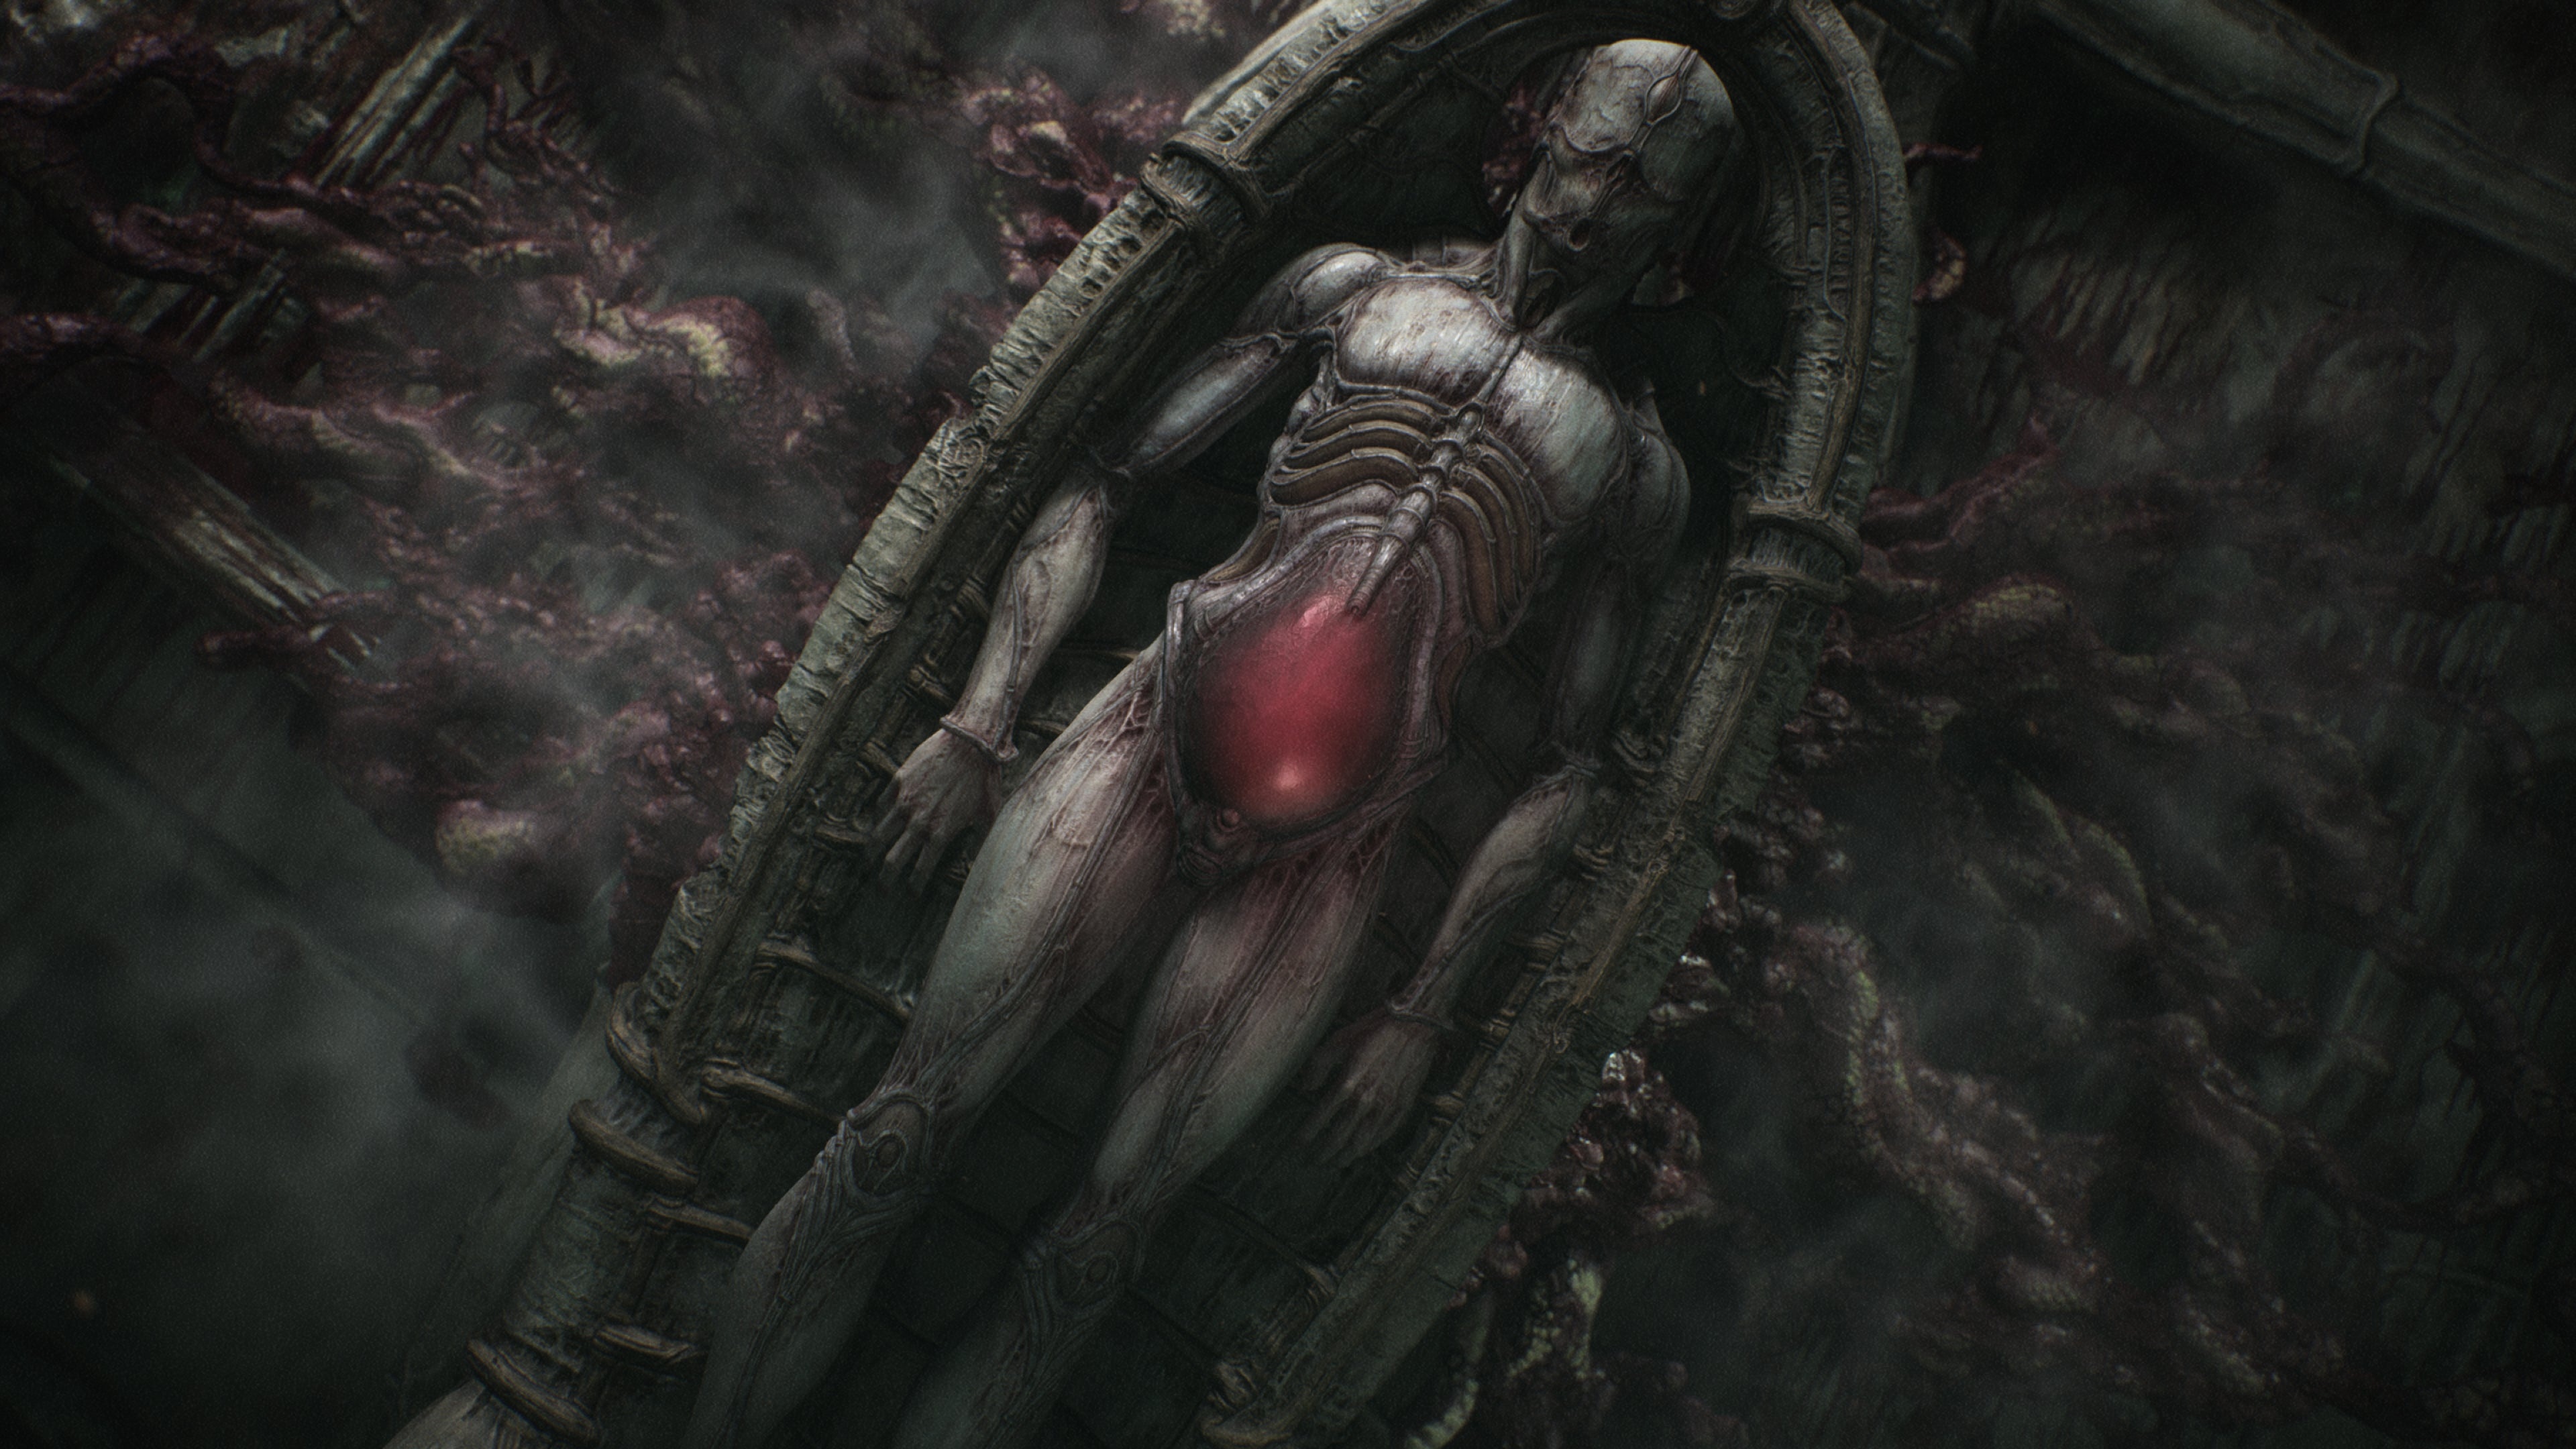 Scorn (Game): A horror slated for Xbox Series X and Series S, A strong H.R. Giger atmosphere. 3840x2160 4K Wallpaper.